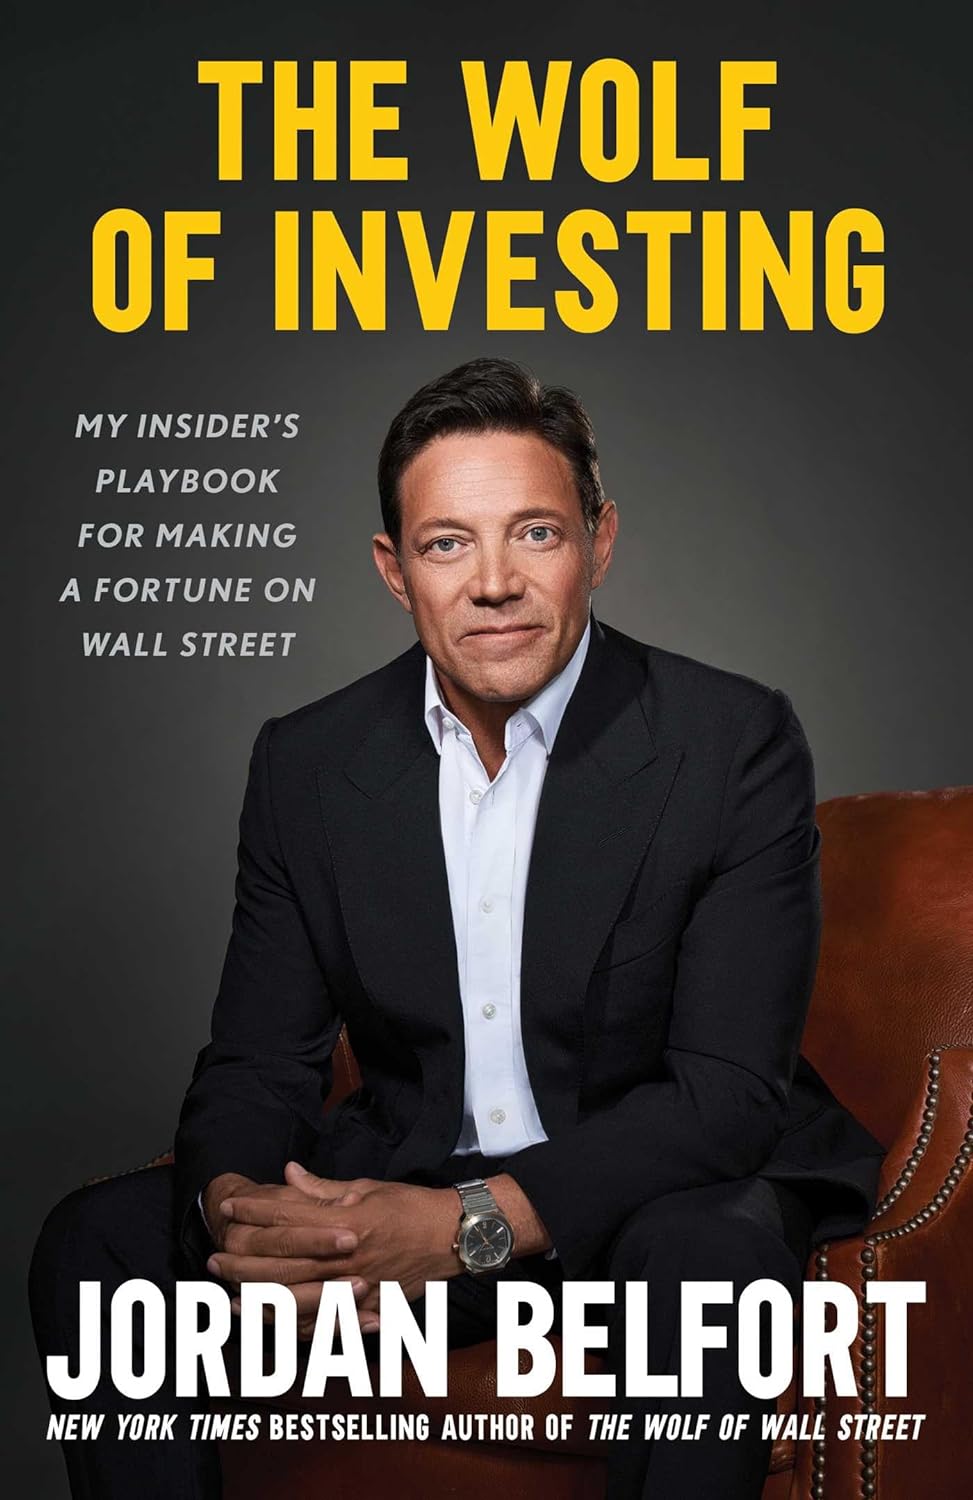 the-wolf-of-investing-my-playbook-for-making-a-fortune-on-wall-street